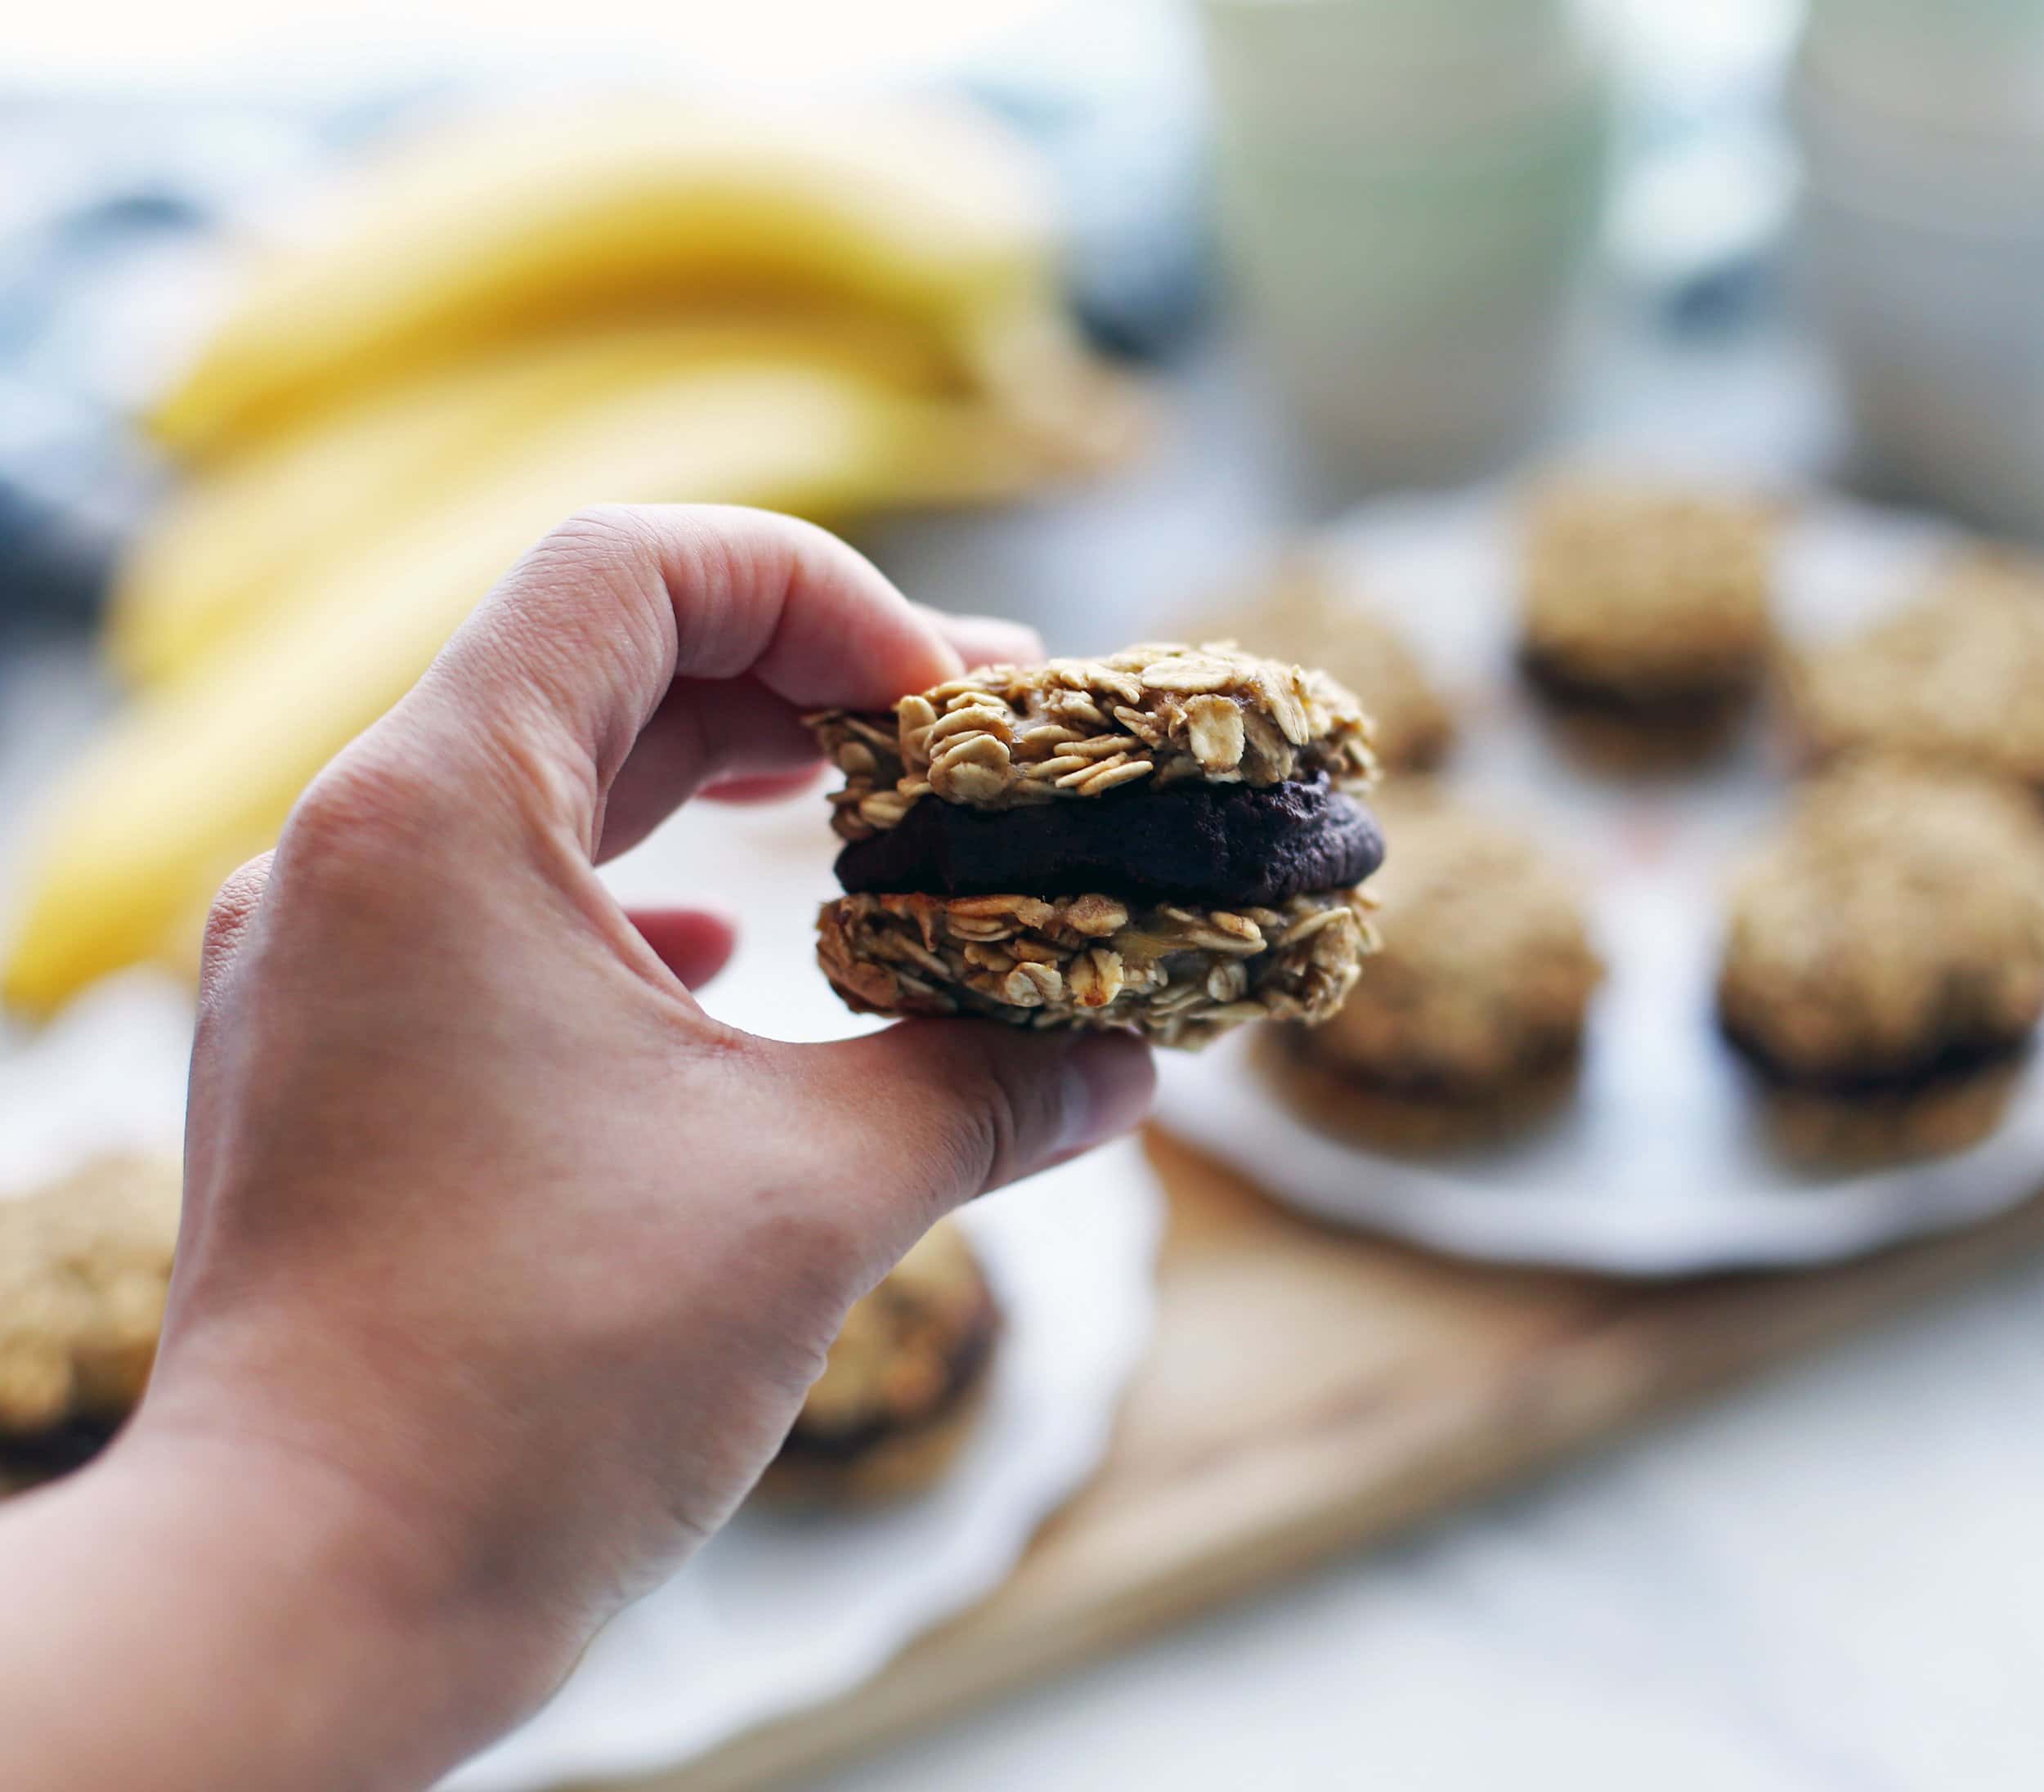 A hand holding a single banana oatmeal sandwich cookies with peanut butter cocoa filling.